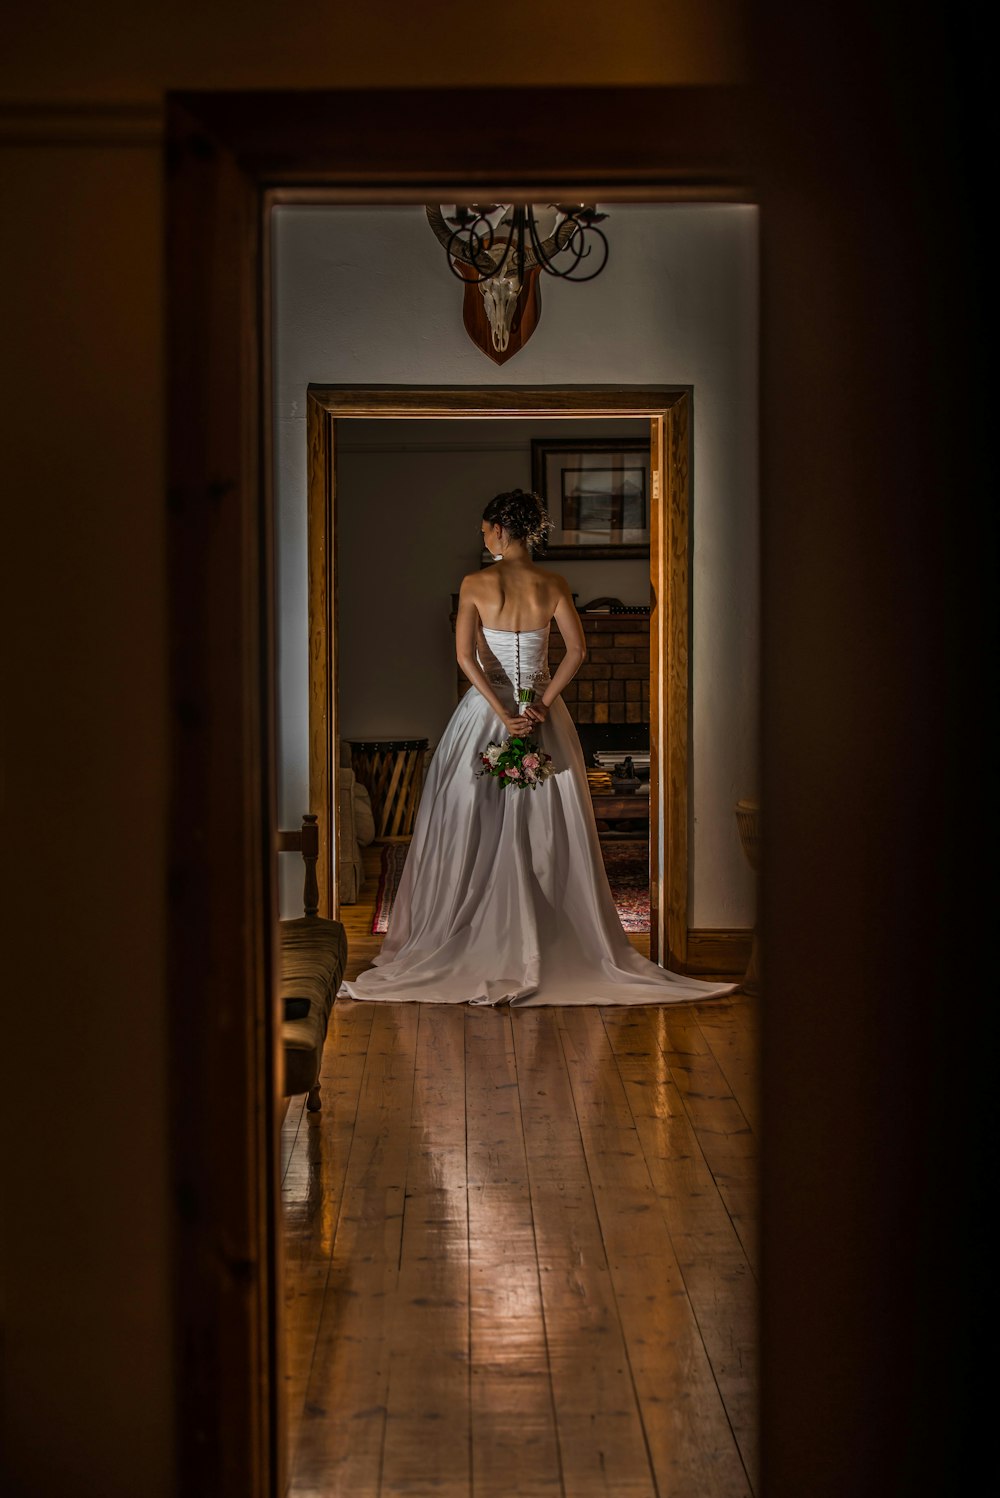 woman in white wedding gown standing on brown wooden floor